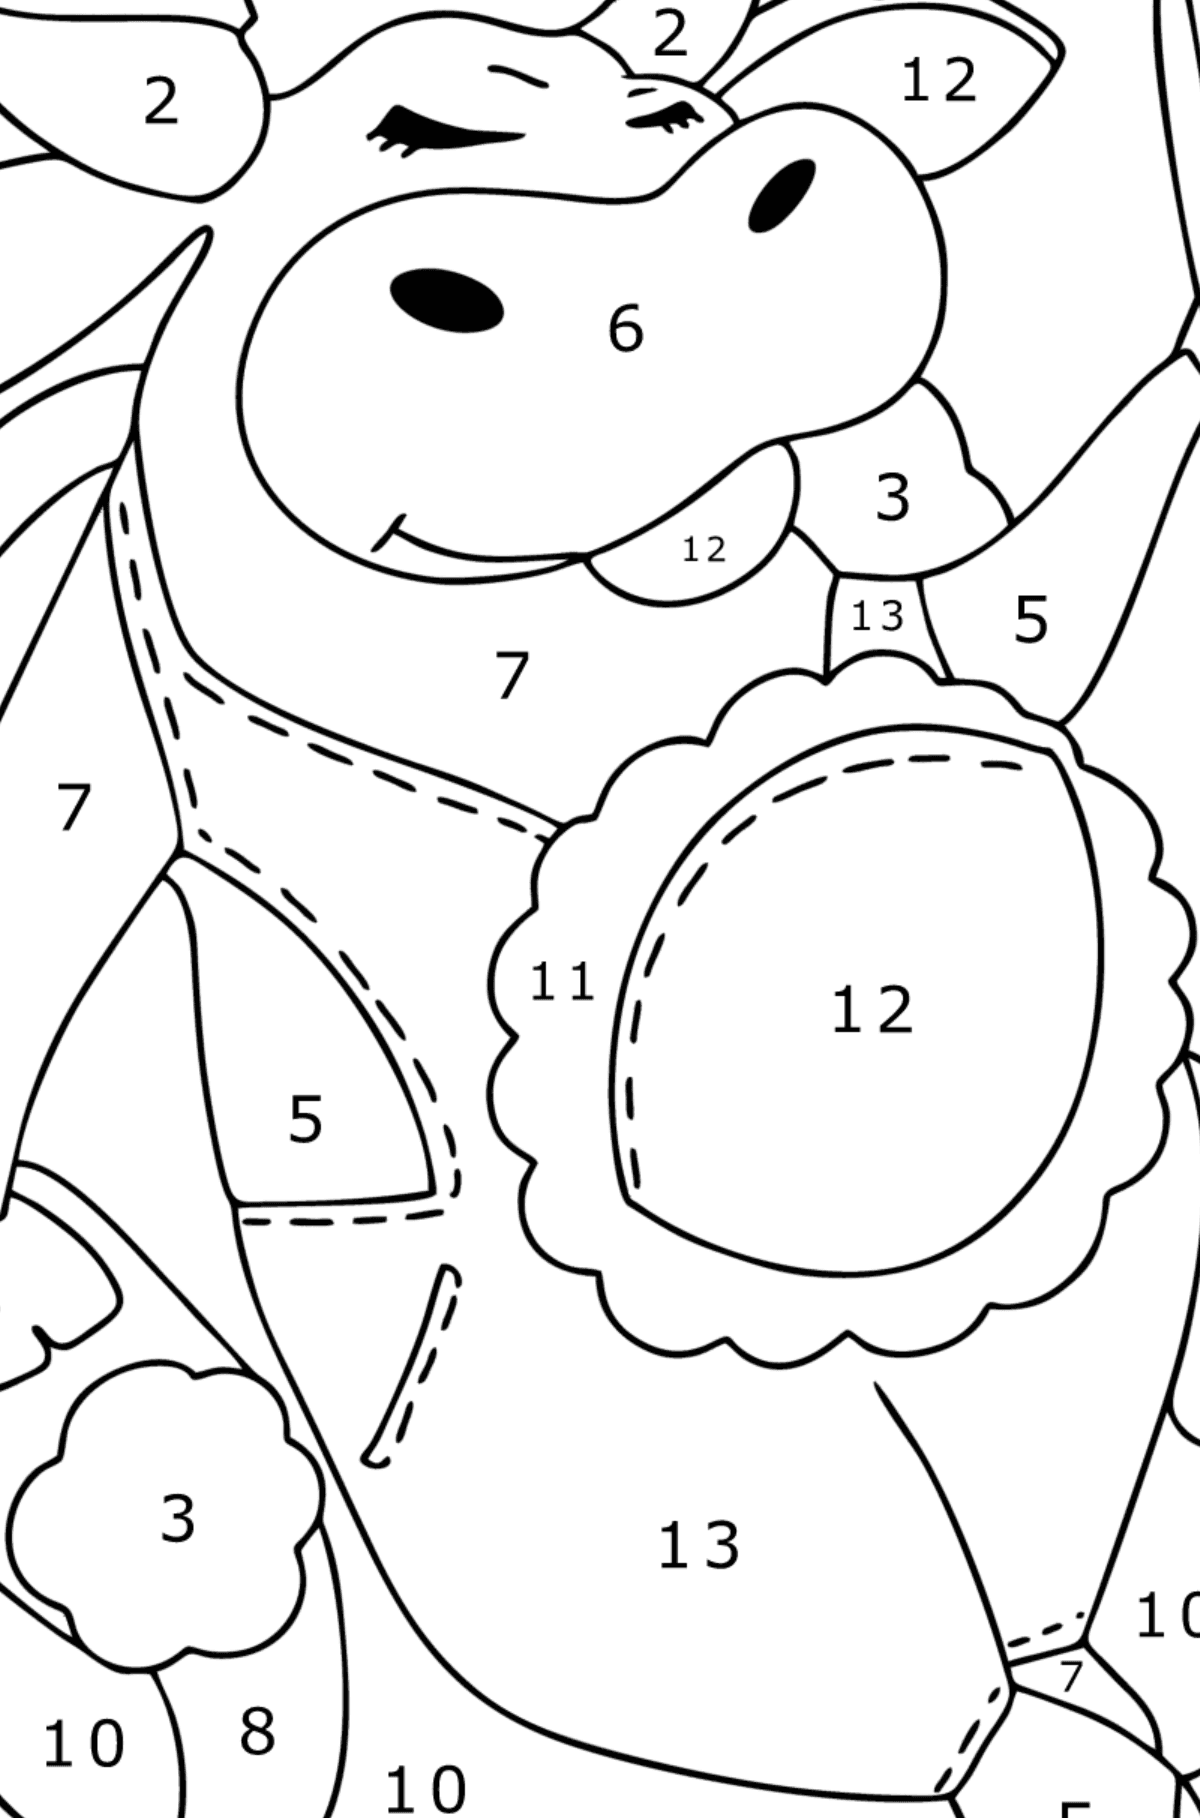 Funny cow coloring page - Coloring by Numbers for Kids